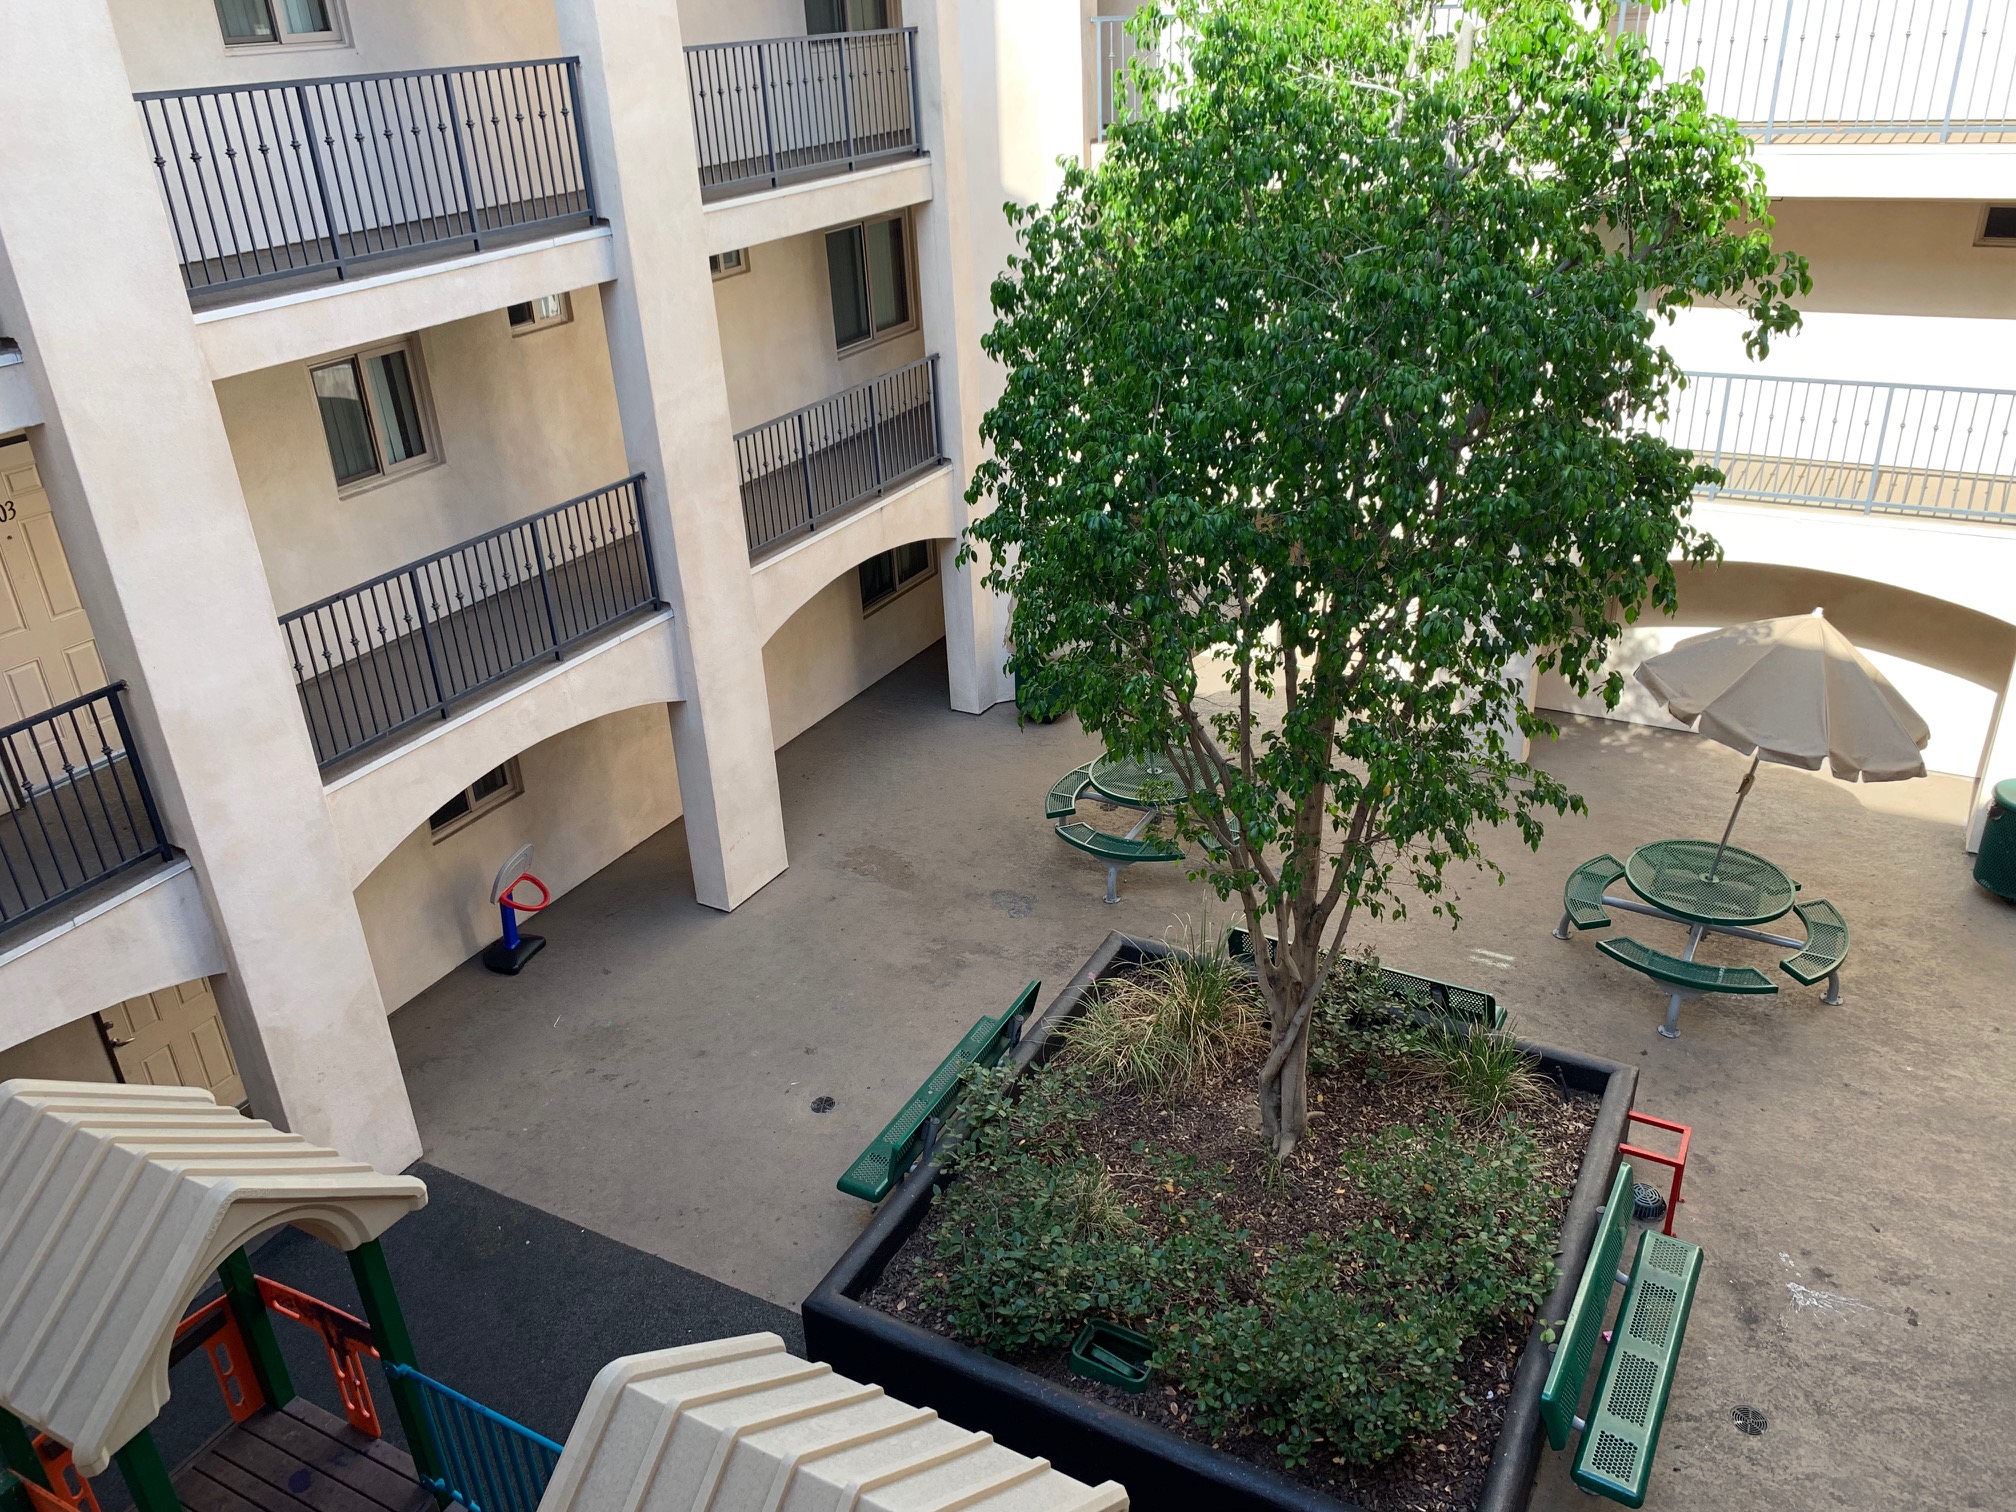 Exterior view of a courtyard with a large tree and umbrella picnic tables at the Mindanao